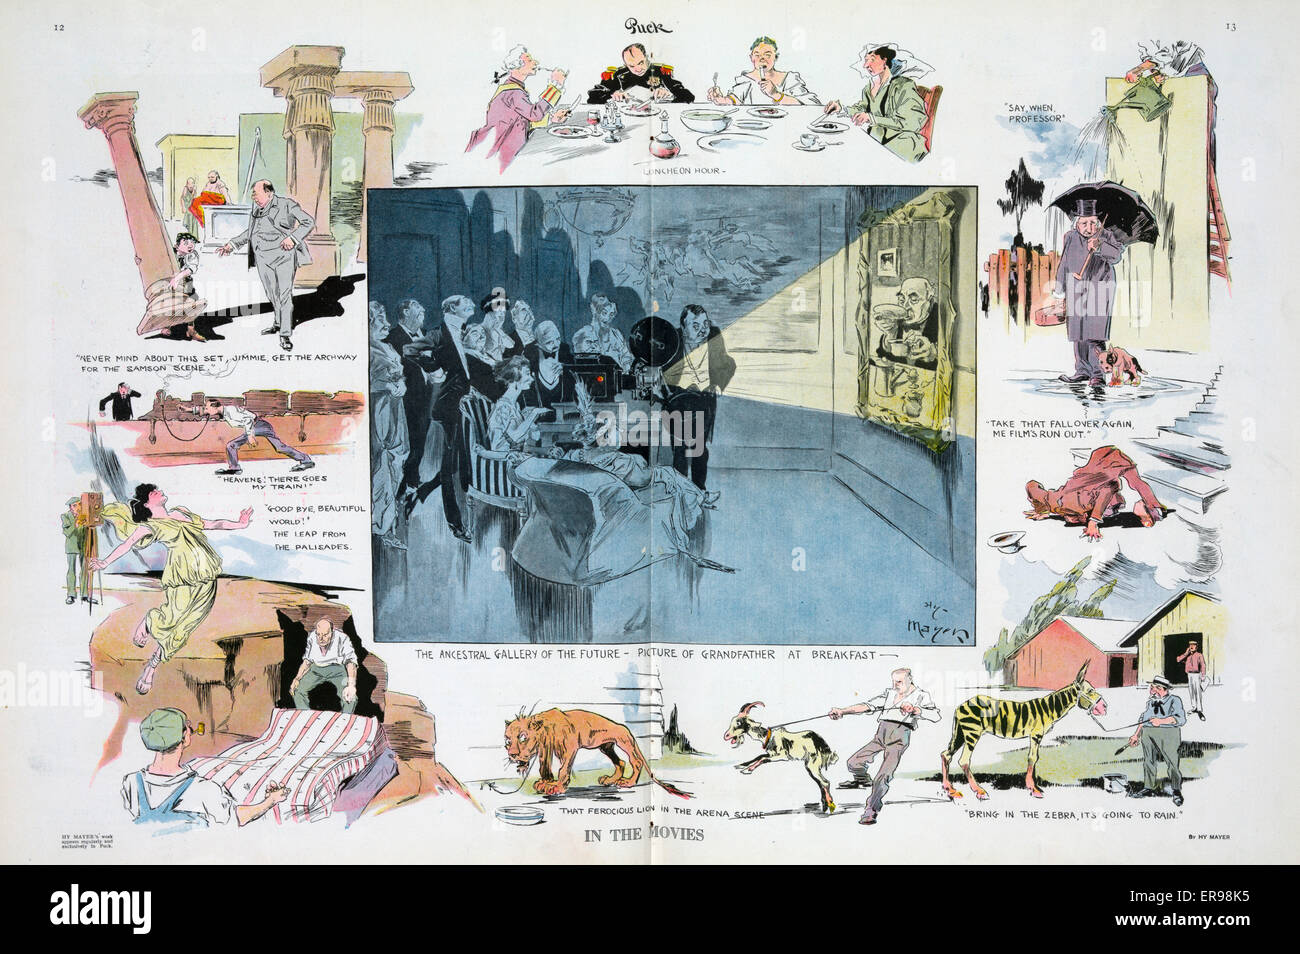 In the movies. Illustration shows a vignette cartoon depicting scenes from the making of movies; at center is The ancestral gallery of the future - picture of grandfather at breakfast showing a group of upper class people with a movie projector illuminati Stock Photo